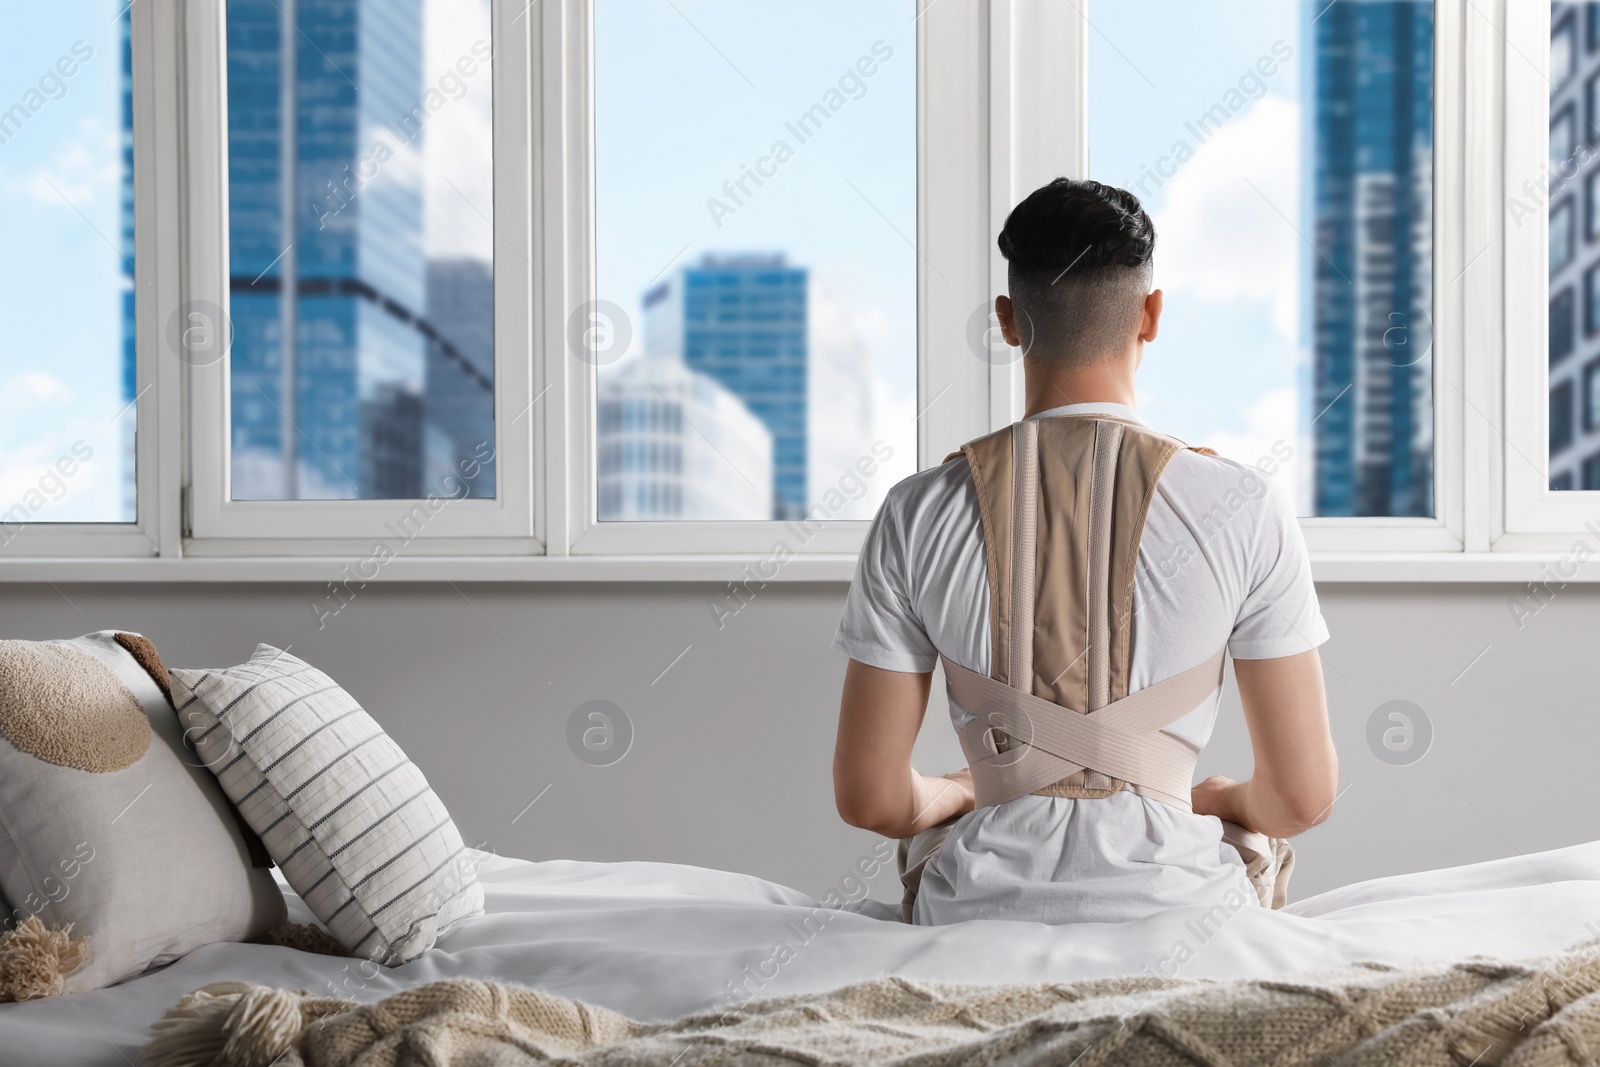 Photo of Man with orthopedic corset sitting in room, back view